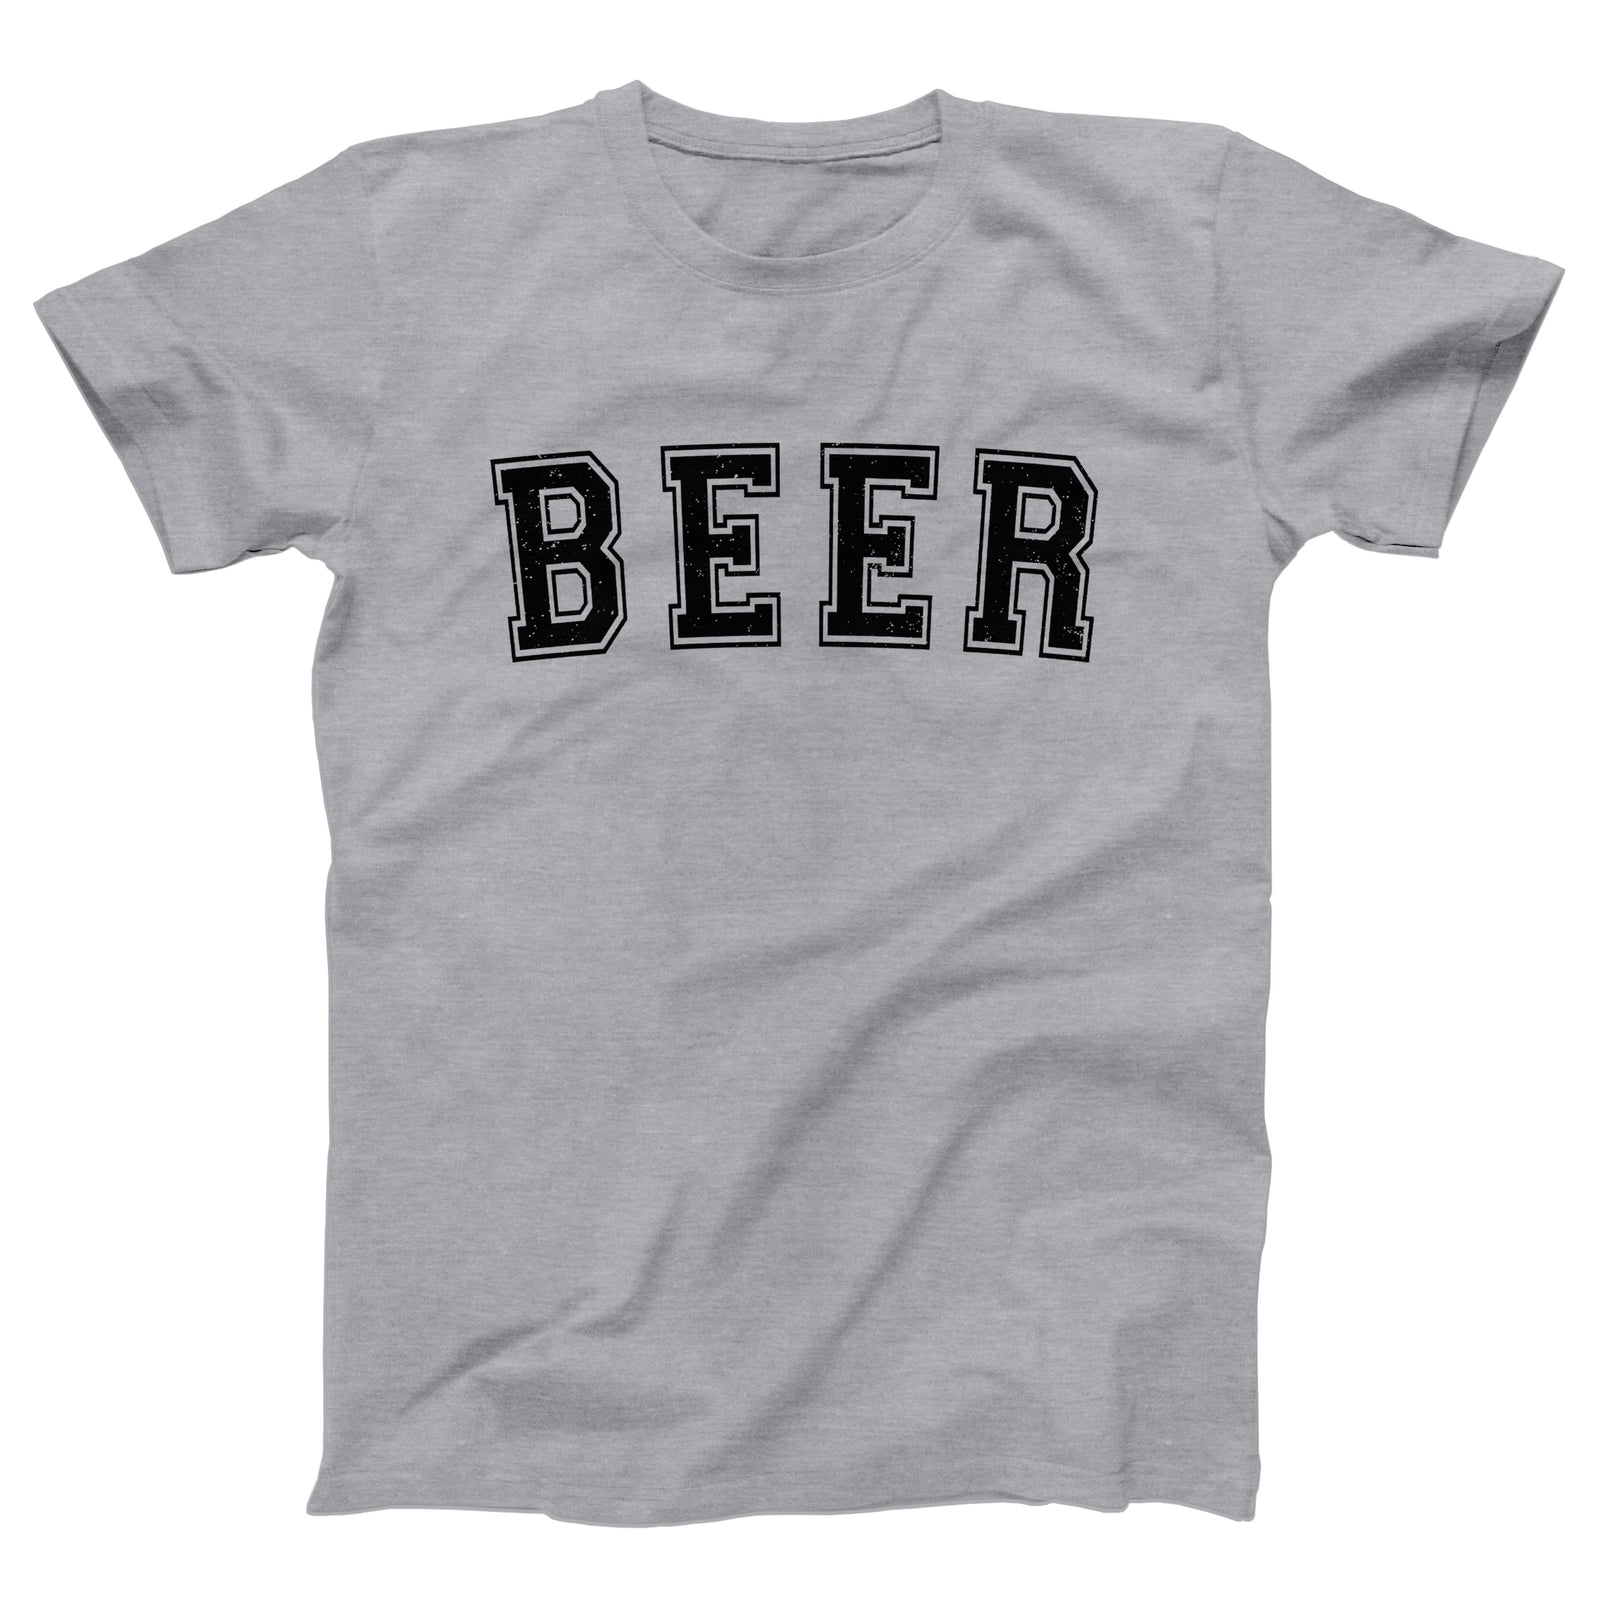 //cdn.shopify.com/s/files/1/0274/2488/2766/products/beer-menunisex-t-shirt-898931_5000x.jpg?v=1618251958 5000w,
    //cdn.shopify.com/s/files/1/0274/2488/2766/products/beer-menunisex-t-shirt-898931_4500x.jpg?v=1618251958 4500w,
    //cdn.shopify.com/s/files/1/0274/2488/2766/products/beer-menunisex-t-shirt-898931_4000x.jpg?v=1618251958 4000w,
    //cdn.shopify.com/s/files/1/0274/2488/2766/products/beer-menunisex-t-shirt-898931_3500x.jpg?v=1618251958 3500w,
    //cdn.shopify.com/s/files/1/0274/2488/2766/products/beer-menunisex-t-shirt-898931_3000x.jpg?v=1618251958 3000w,
    //cdn.shopify.com/s/files/1/0274/2488/2766/products/beer-menunisex-t-shirt-898931_2500x.jpg?v=1618251958 2500w,
    //cdn.shopify.com/s/files/1/0274/2488/2766/products/beer-menunisex-t-shirt-898931_2000x.jpg?v=1618251958 2000w,
    //cdn.shopify.com/s/files/1/0274/2488/2766/products/beer-menunisex-t-shirt-898931_1800x.jpg?v=1618251958 1800w,
    //cdn.shopify.com/s/files/1/0274/2488/2766/products/beer-menunisex-t-shirt-898931_1600x.jpg?v=1618251958 1600w,
    //cdn.shopify.com/s/files/1/0274/2488/2766/products/beer-menunisex-t-shirt-898931_1400x.jpg?v=1618251958 1400w,
    //cdn.shopify.com/s/files/1/0274/2488/2766/products/beer-menunisex-t-shirt-898931_1200x.jpg?v=1618251958 1200w,
    //cdn.shopify.com/s/files/1/0274/2488/2766/products/beer-menunisex-t-shirt-898931_1000x.jpg?v=1618251958 1000w,
    //cdn.shopify.com/s/files/1/0274/2488/2766/products/beer-menunisex-t-shirt-898931_800x.jpg?v=1618251958 800w,
    //cdn.shopify.com/s/files/1/0274/2488/2766/products/beer-menunisex-t-shirt-898931_600x.jpg?v=1618251958 600w,
    //cdn.shopify.com/s/files/1/0274/2488/2766/products/beer-menunisex-t-shirt-898931_400x.jpg?v=1618251958 400w,
    //cdn.shopify.com/s/files/1/0274/2488/2766/products/beer-menunisex-t-shirt-898931_200x.jpg?v=1618251958 200w